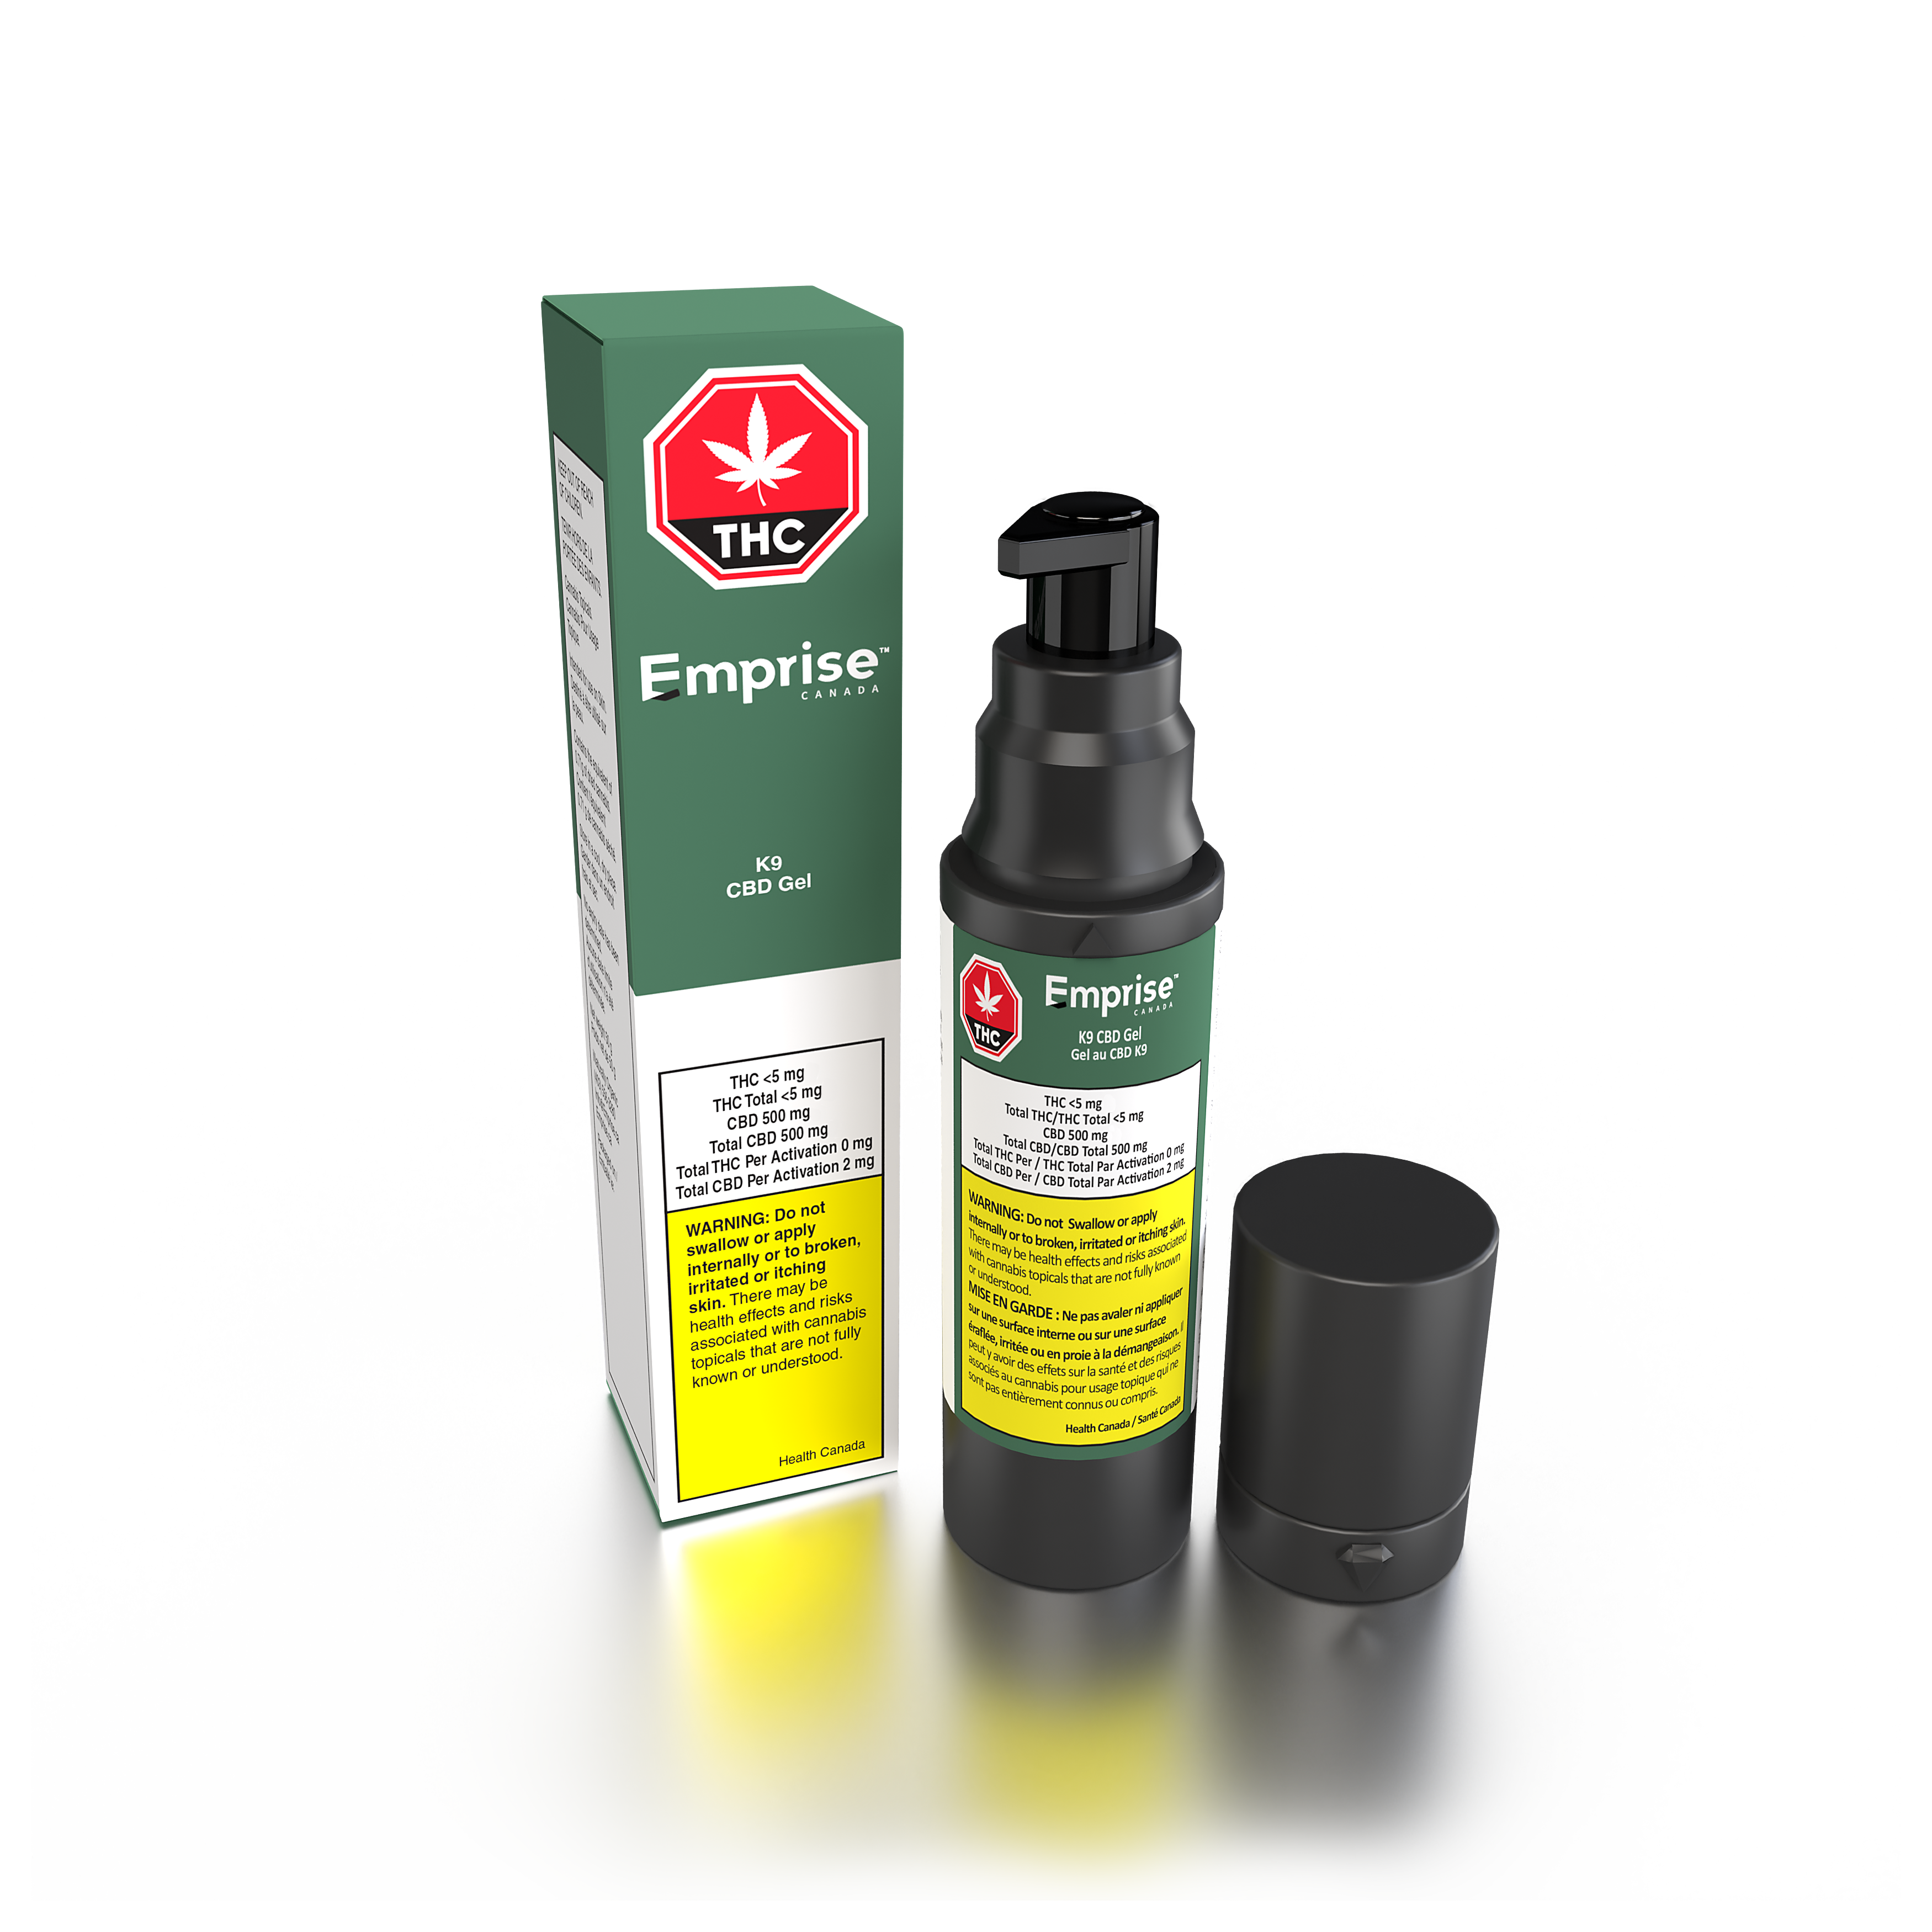 Cannabis Product K9 CBD Topical Gel 500mg CBD by Emprise Canada - 0